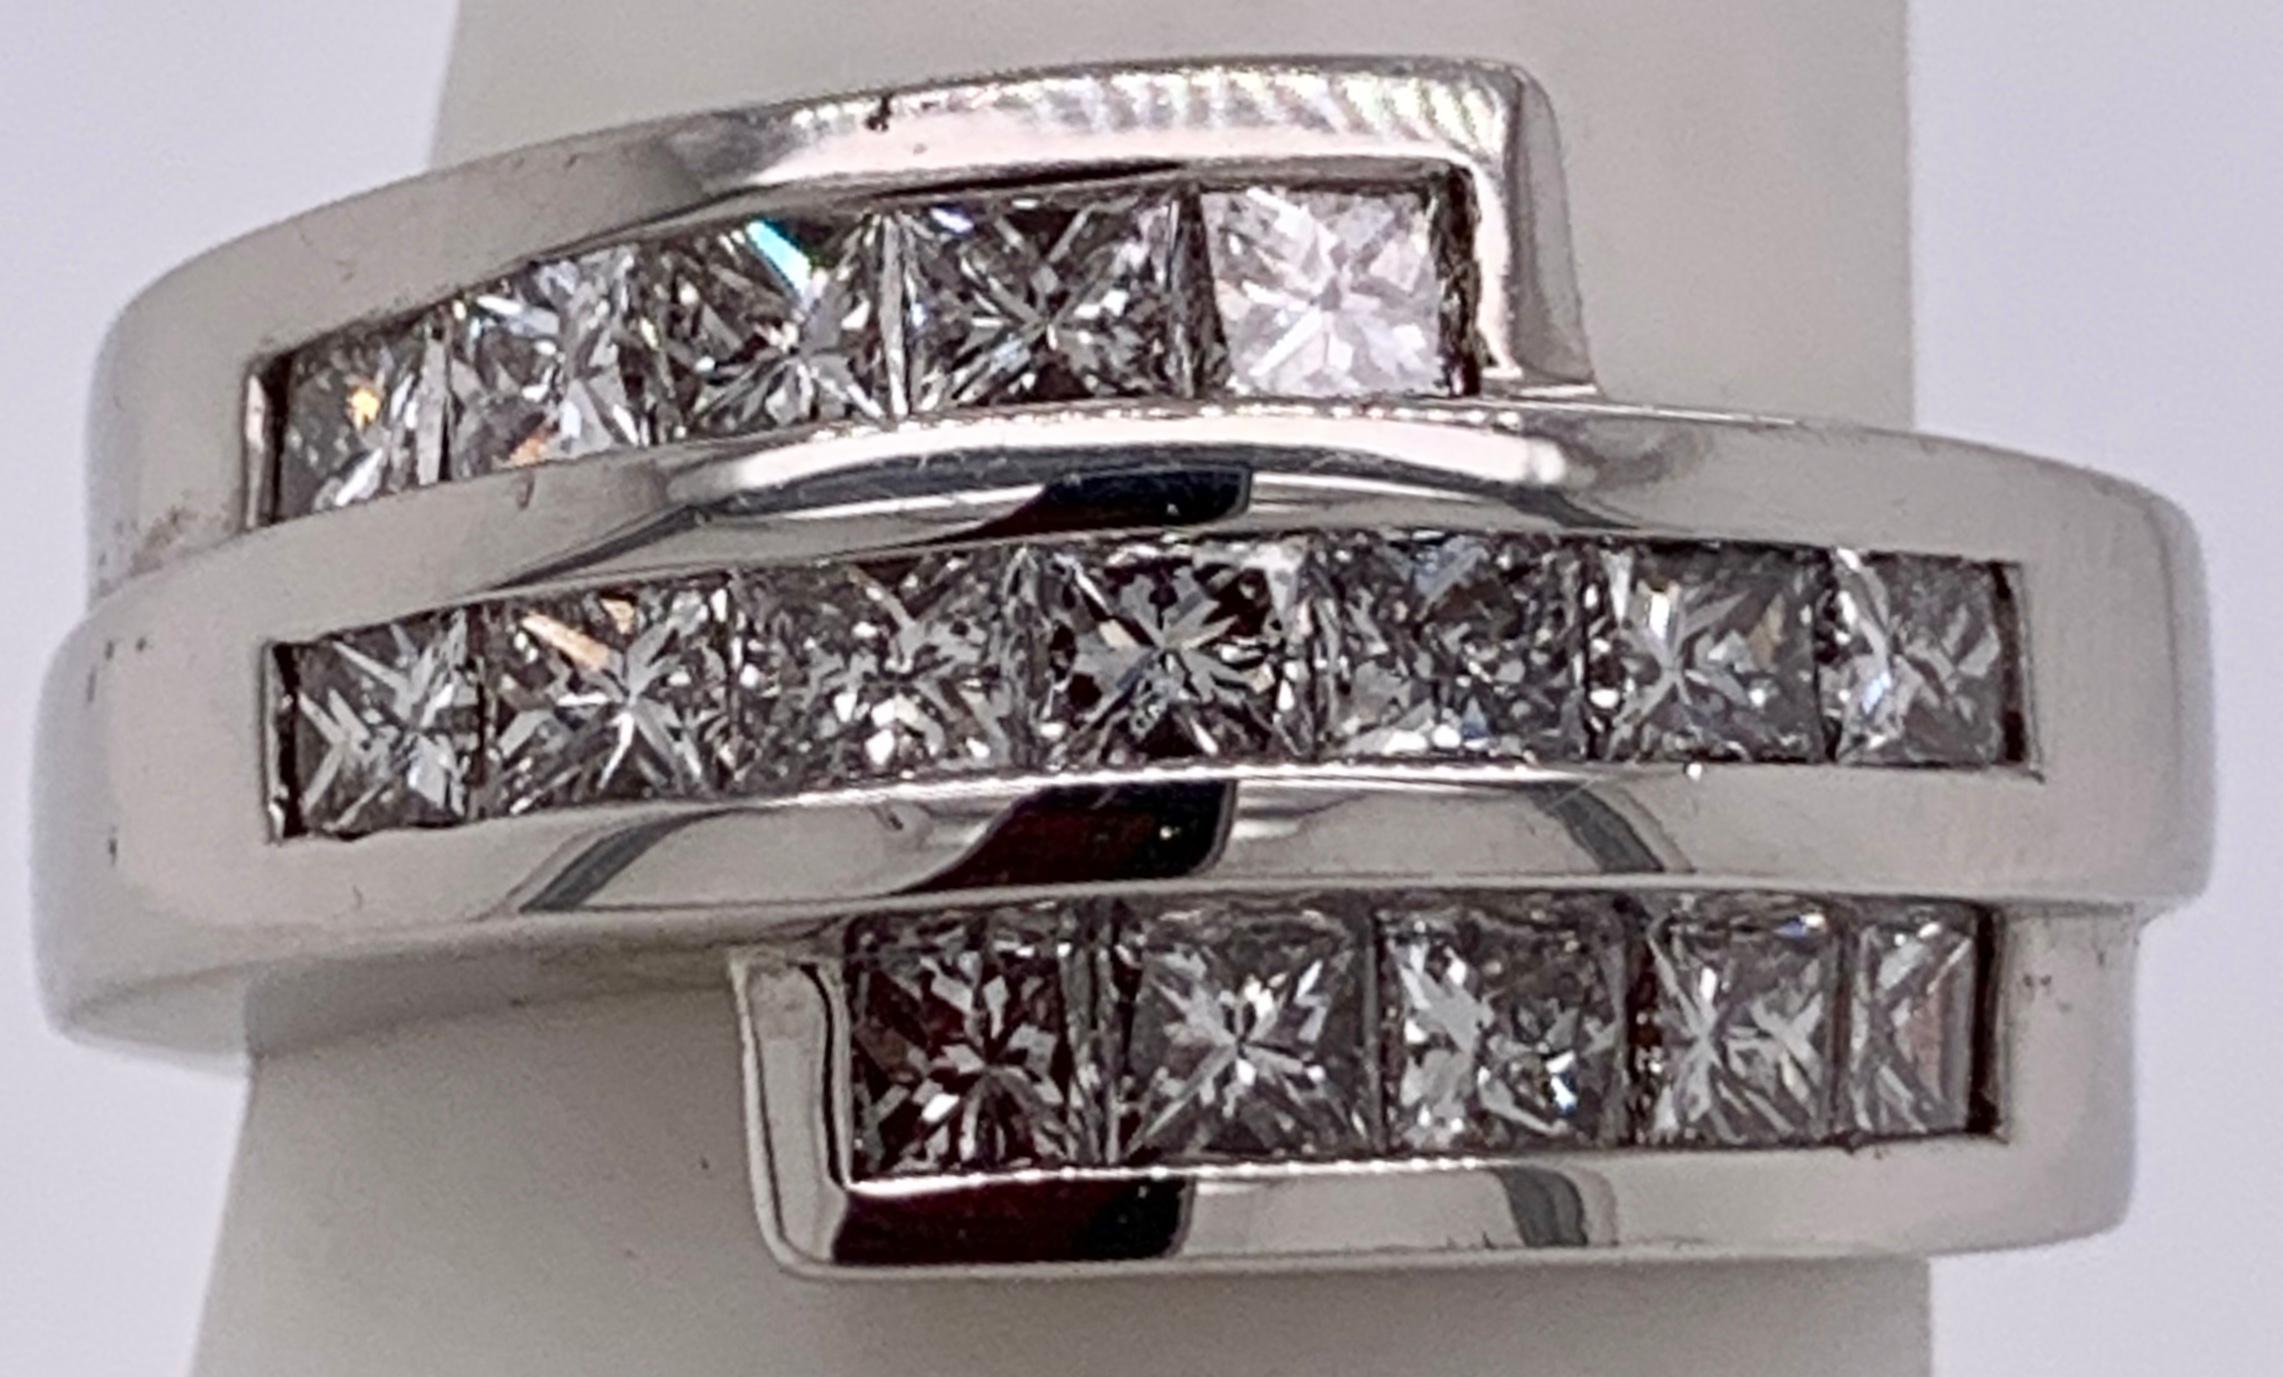 Platinum Ring Wedding Band With Three Tier Diamond Design
Size 8.25. 
2.00 Total Diamond Weight.
18.00 grams Total Weight
